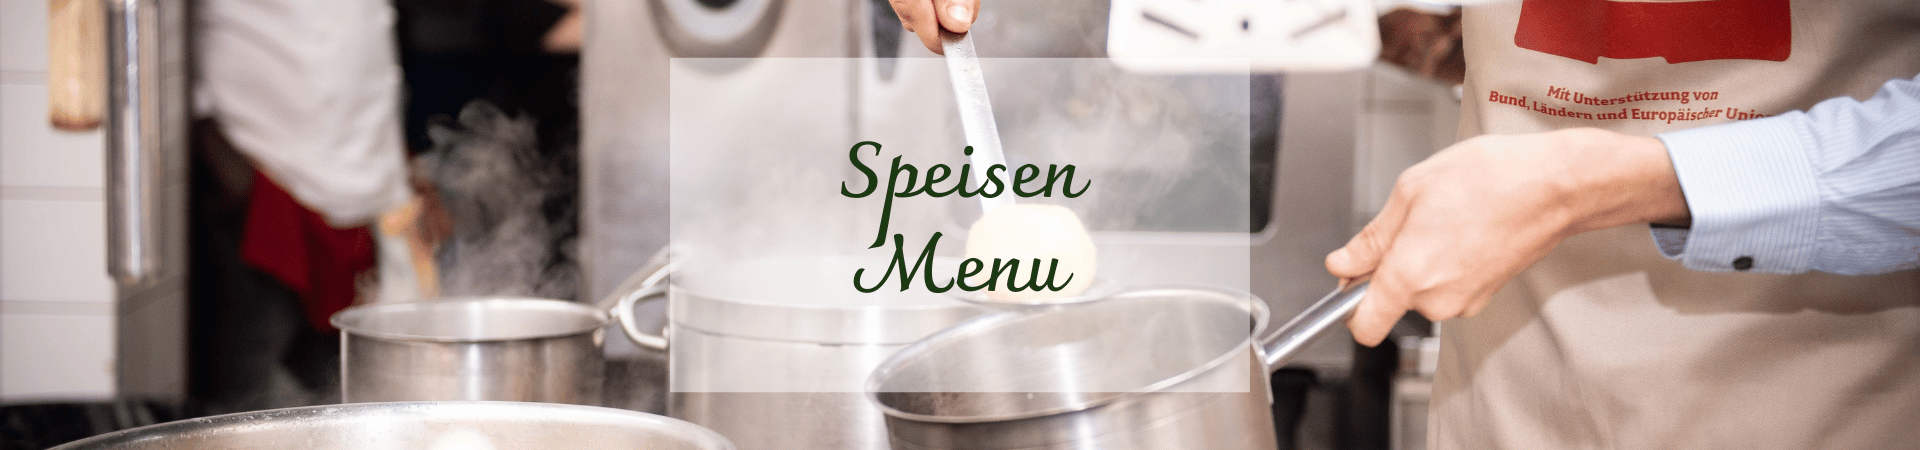 https://cdn.gastronovi.com/tmp/images/webseite-unterseite-speisekarten-1920-450-px_1920x450_or_21410755905a1c699.png